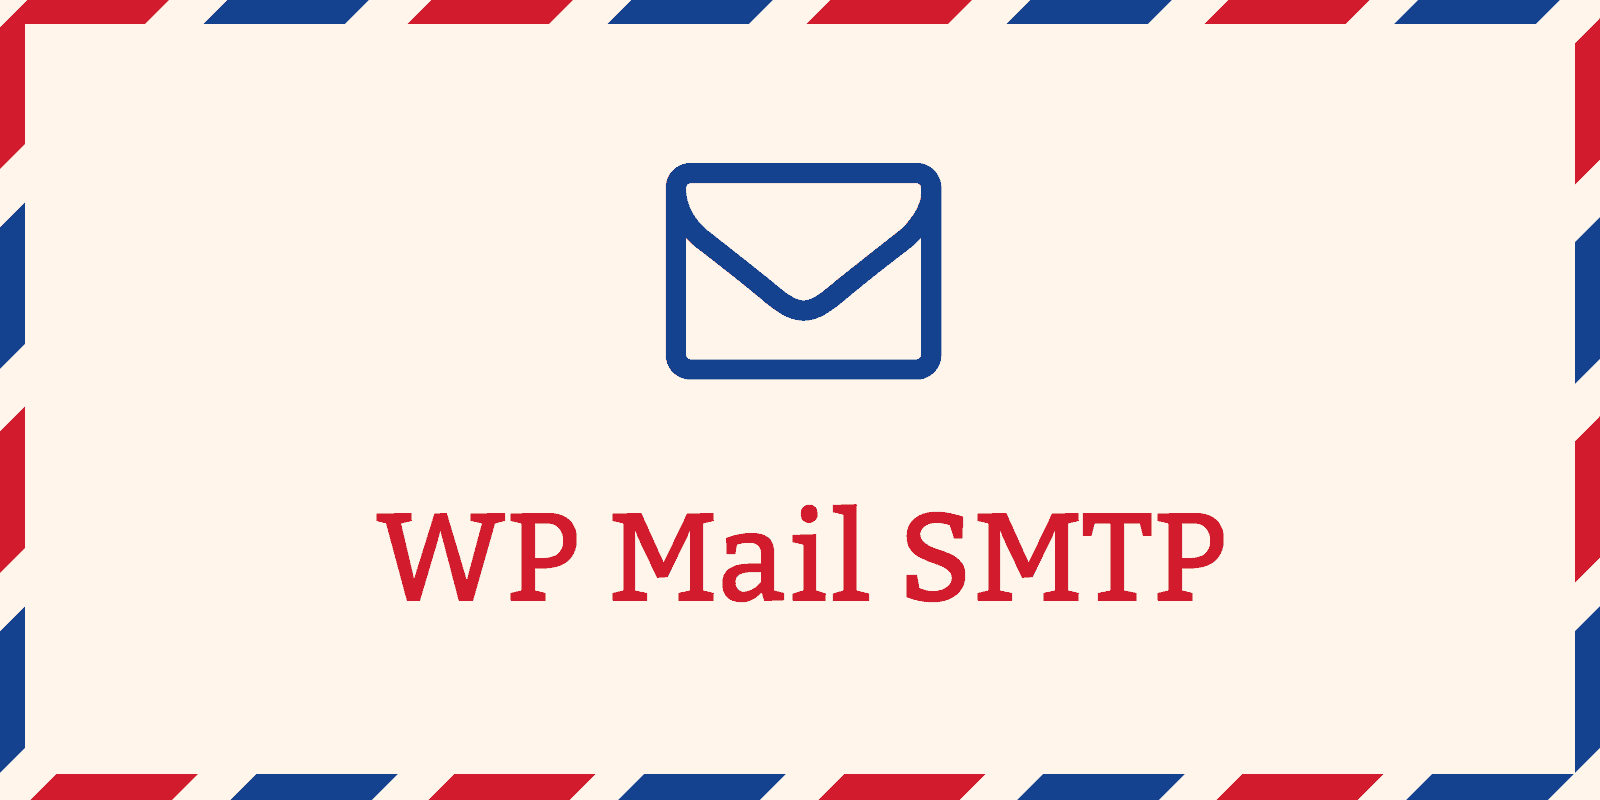 Wordpress письмо. SMTP. Contact form 7. Received email frame. Sending mail gif.